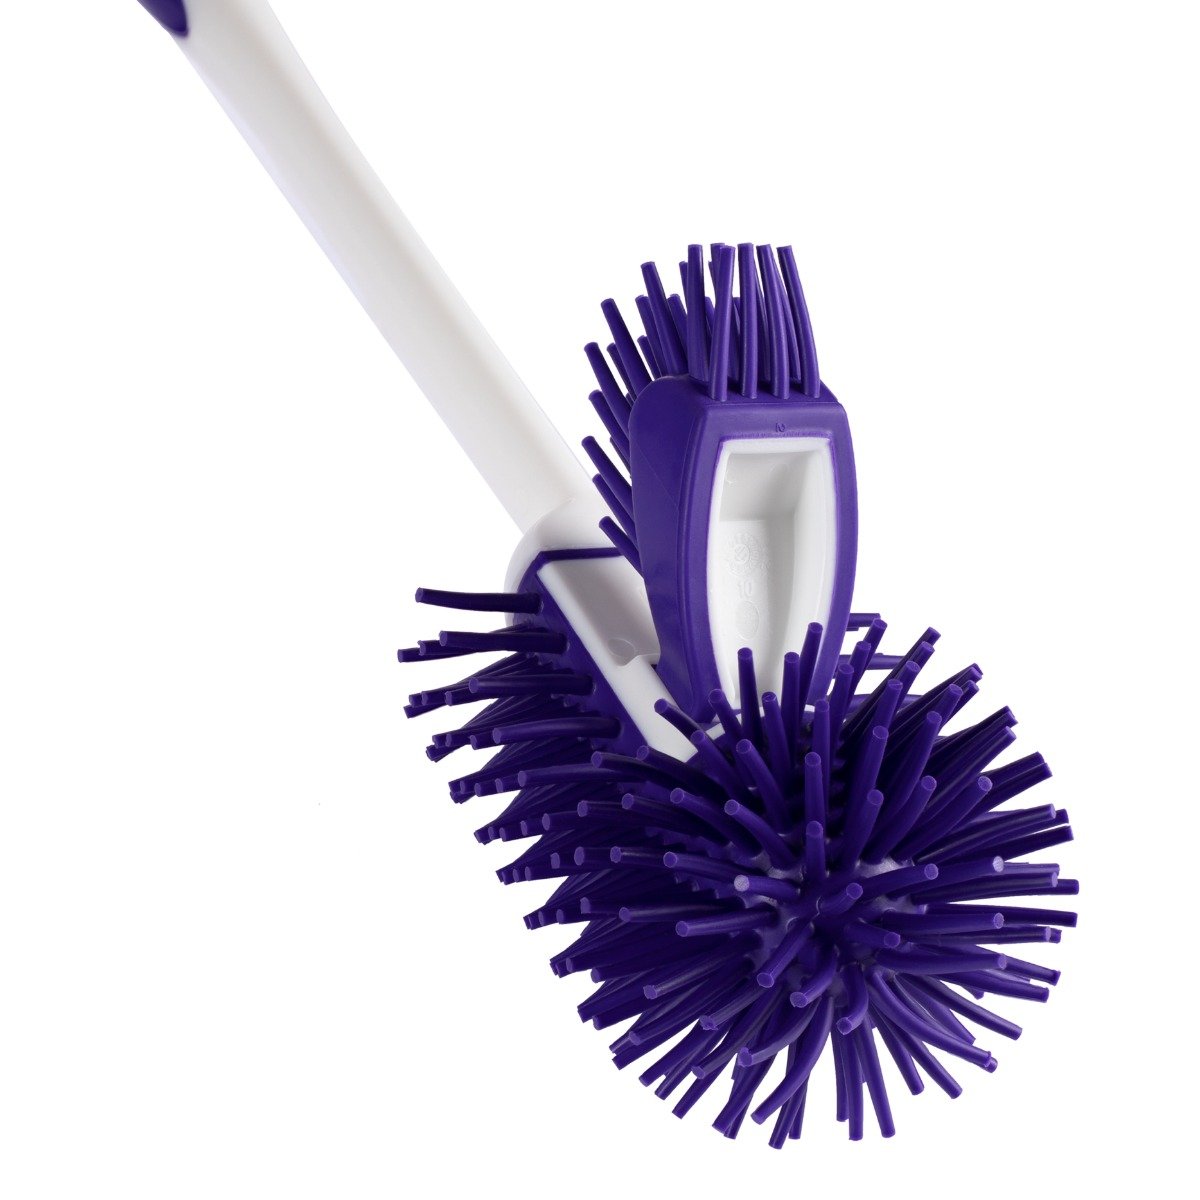 Compact Toilet Bowl Cleaner Brush and Holder w/ Silicone Bristles – Item  #5081 – H&J Liquidators and Closeouts, Inc